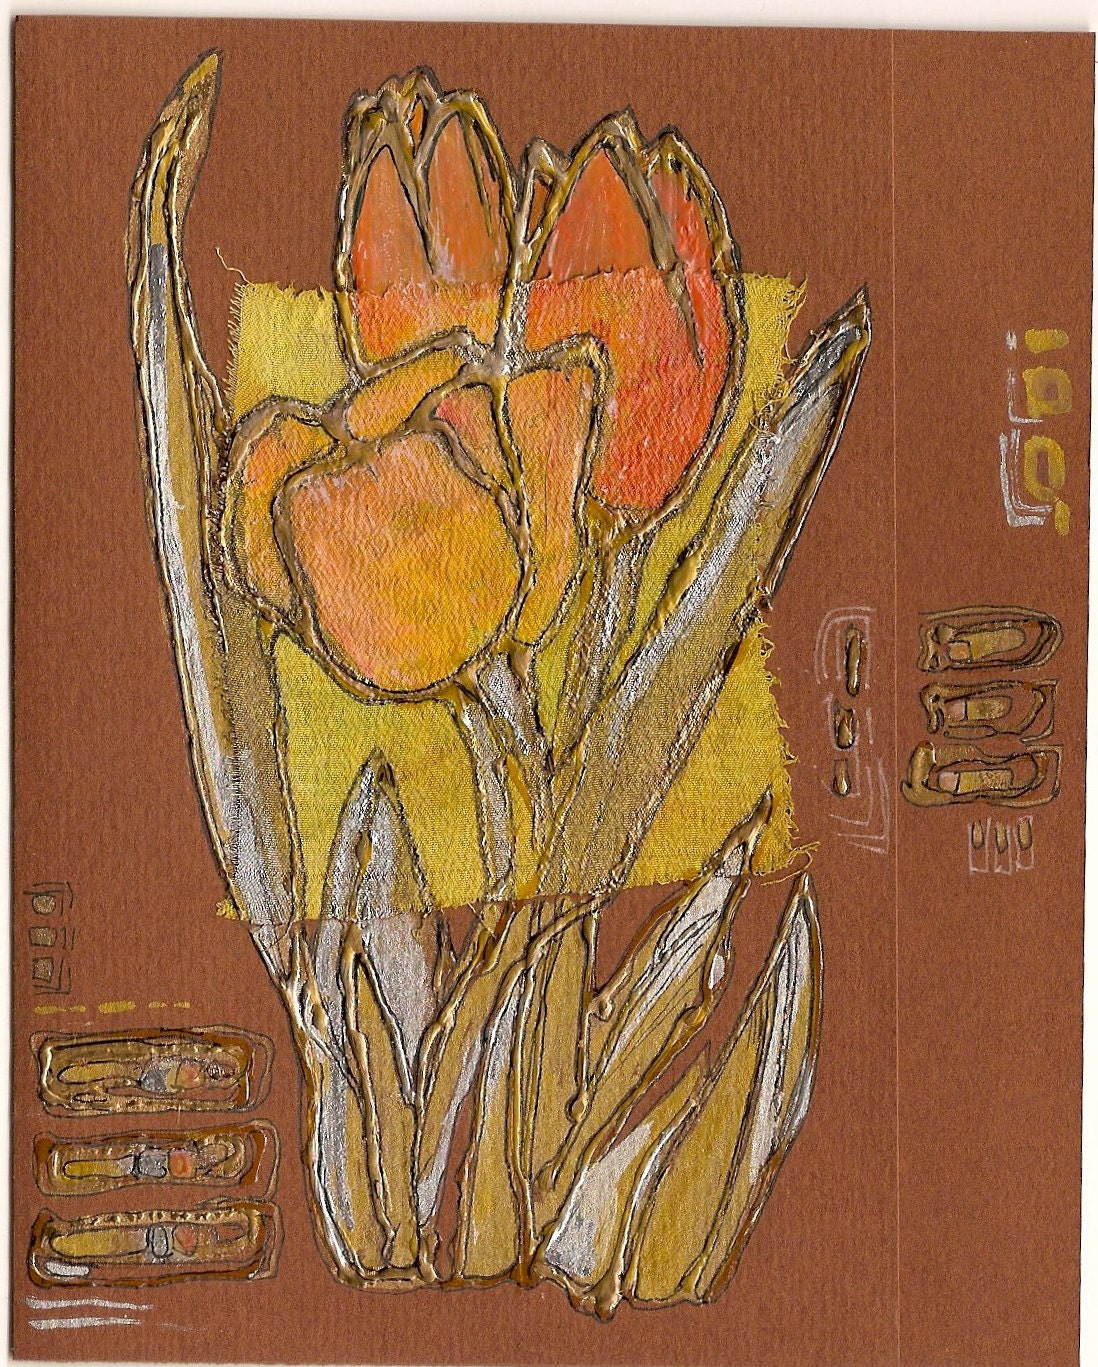 Orange tulips - blank greeting card for any occasion